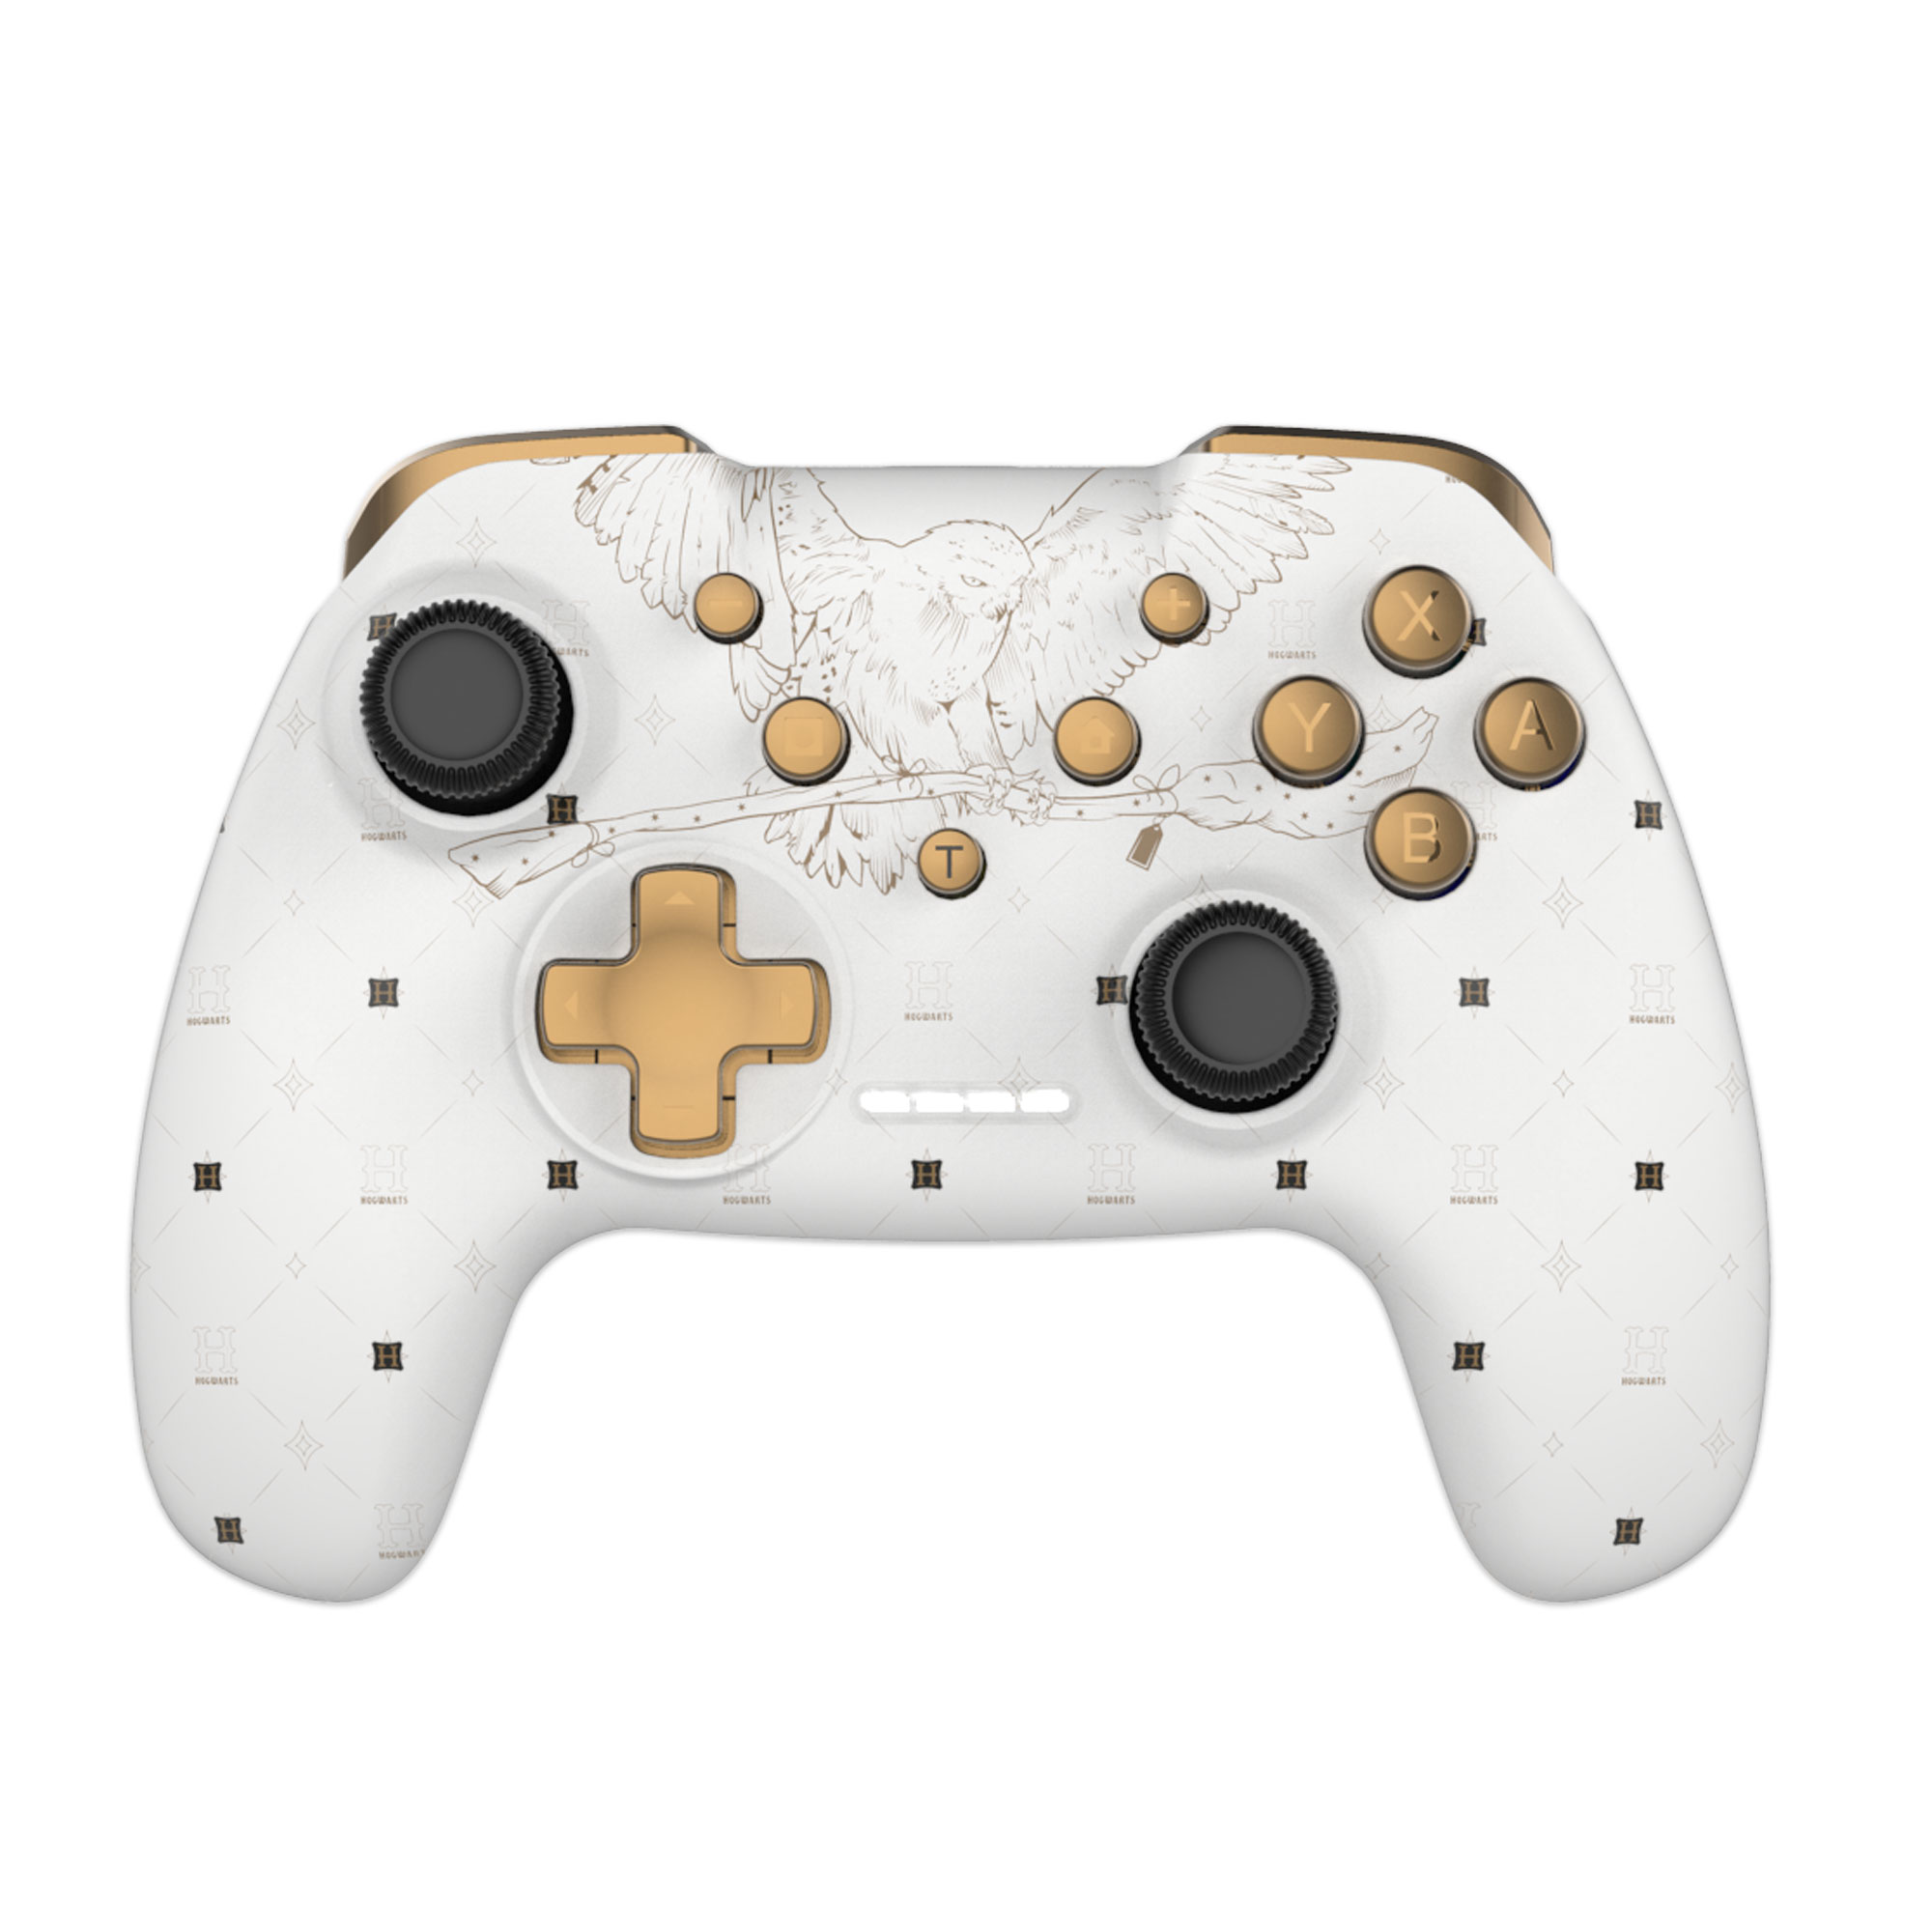 Manette Hedwige pour Switch - Freaks and Geeks - Harry Potter 